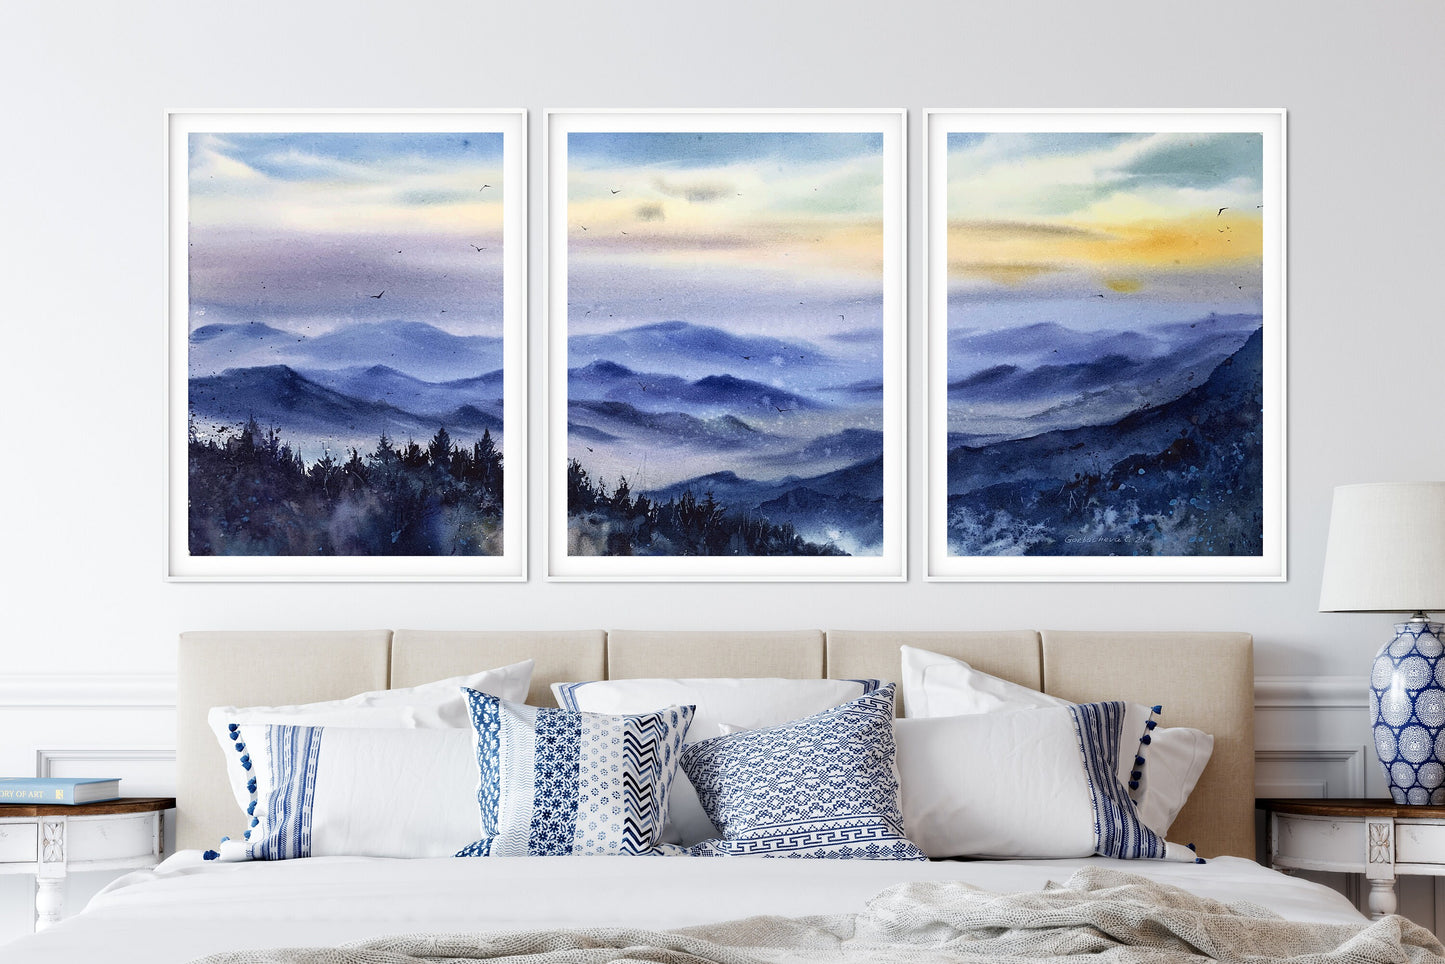 Set of 3 Fog Mountains Print, Nature Gallery Wall Prints, Blue Mountain Landscape 3 Piece Wall Art, Foggy Morning Forest